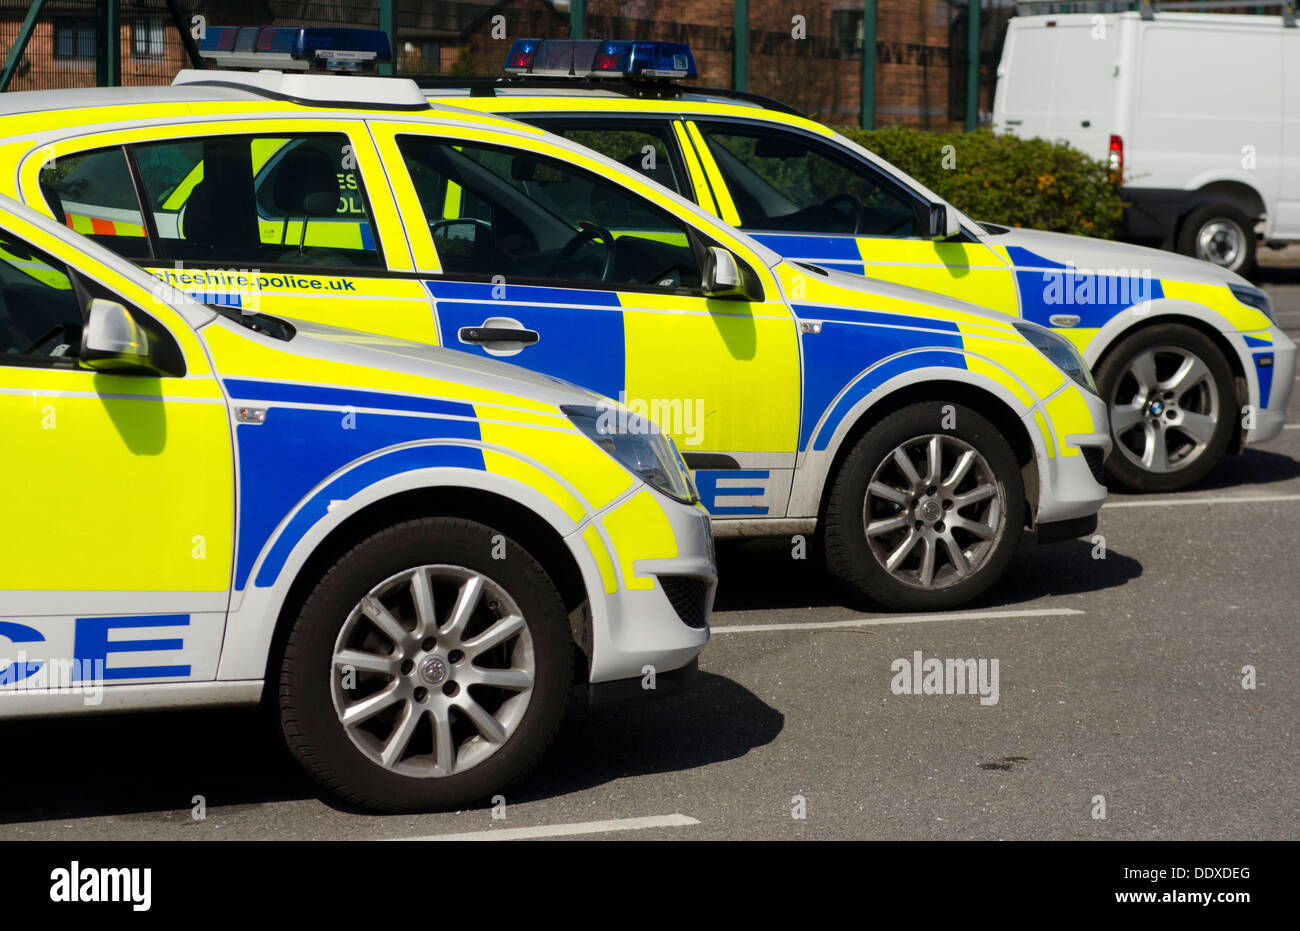 Police cars lined up in a car park, showing vivid fluorescent  yellow and blue markings. Stock Photo